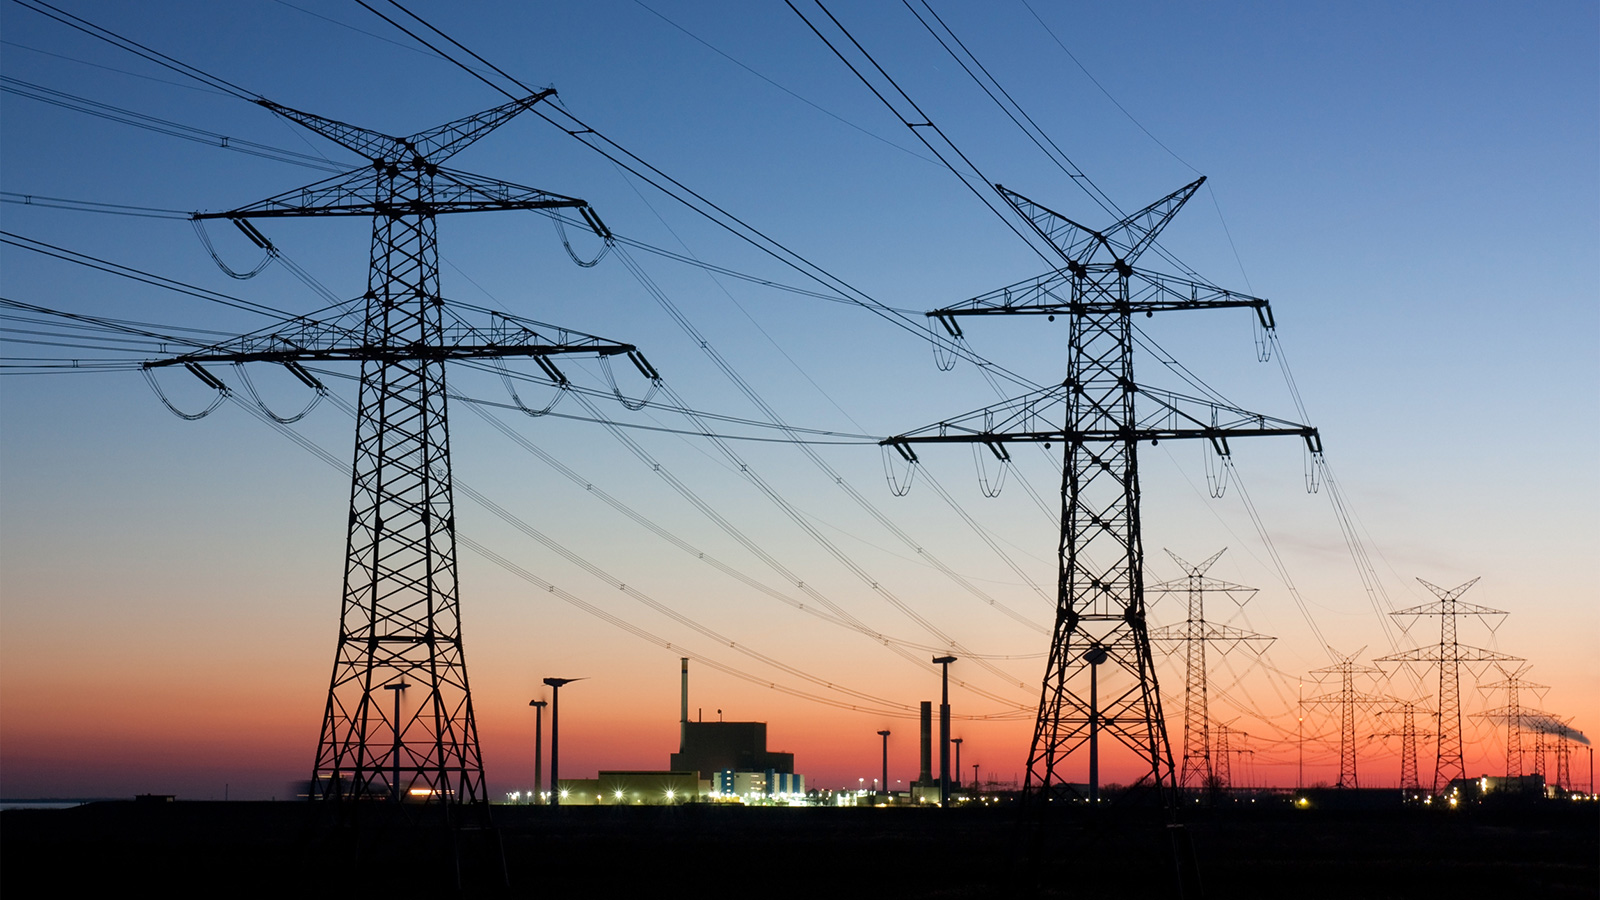 photo of high-voltage powerlines at sunset with wind turbines and nuclear generation plant in background